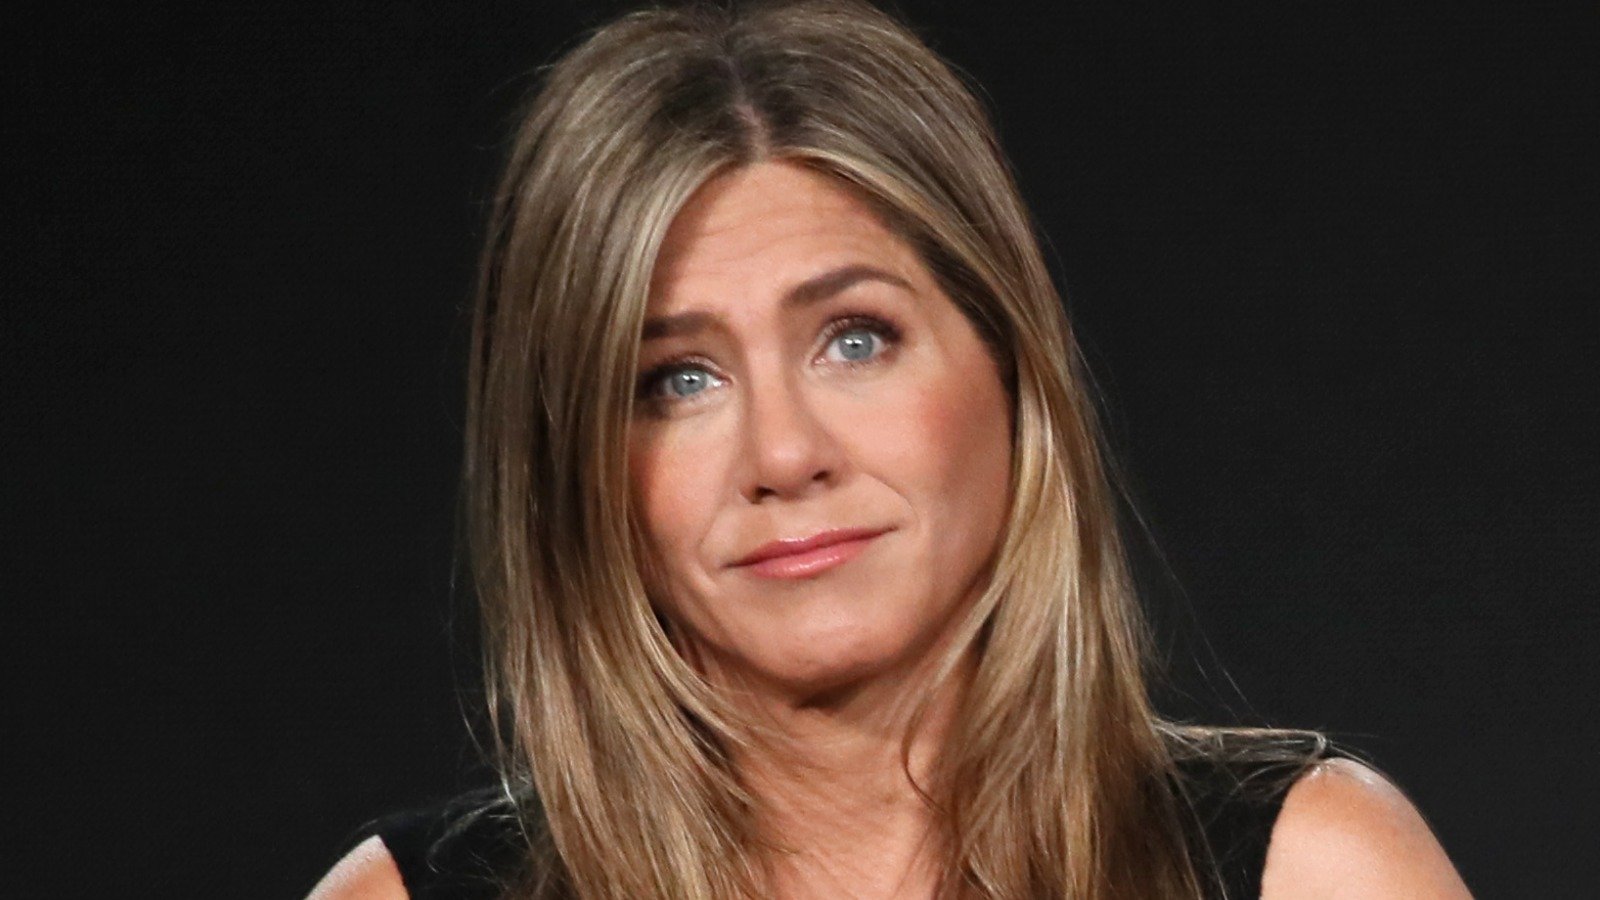 The Most Painful Criticism That Has Stuck With Jennifer Aniston For Years